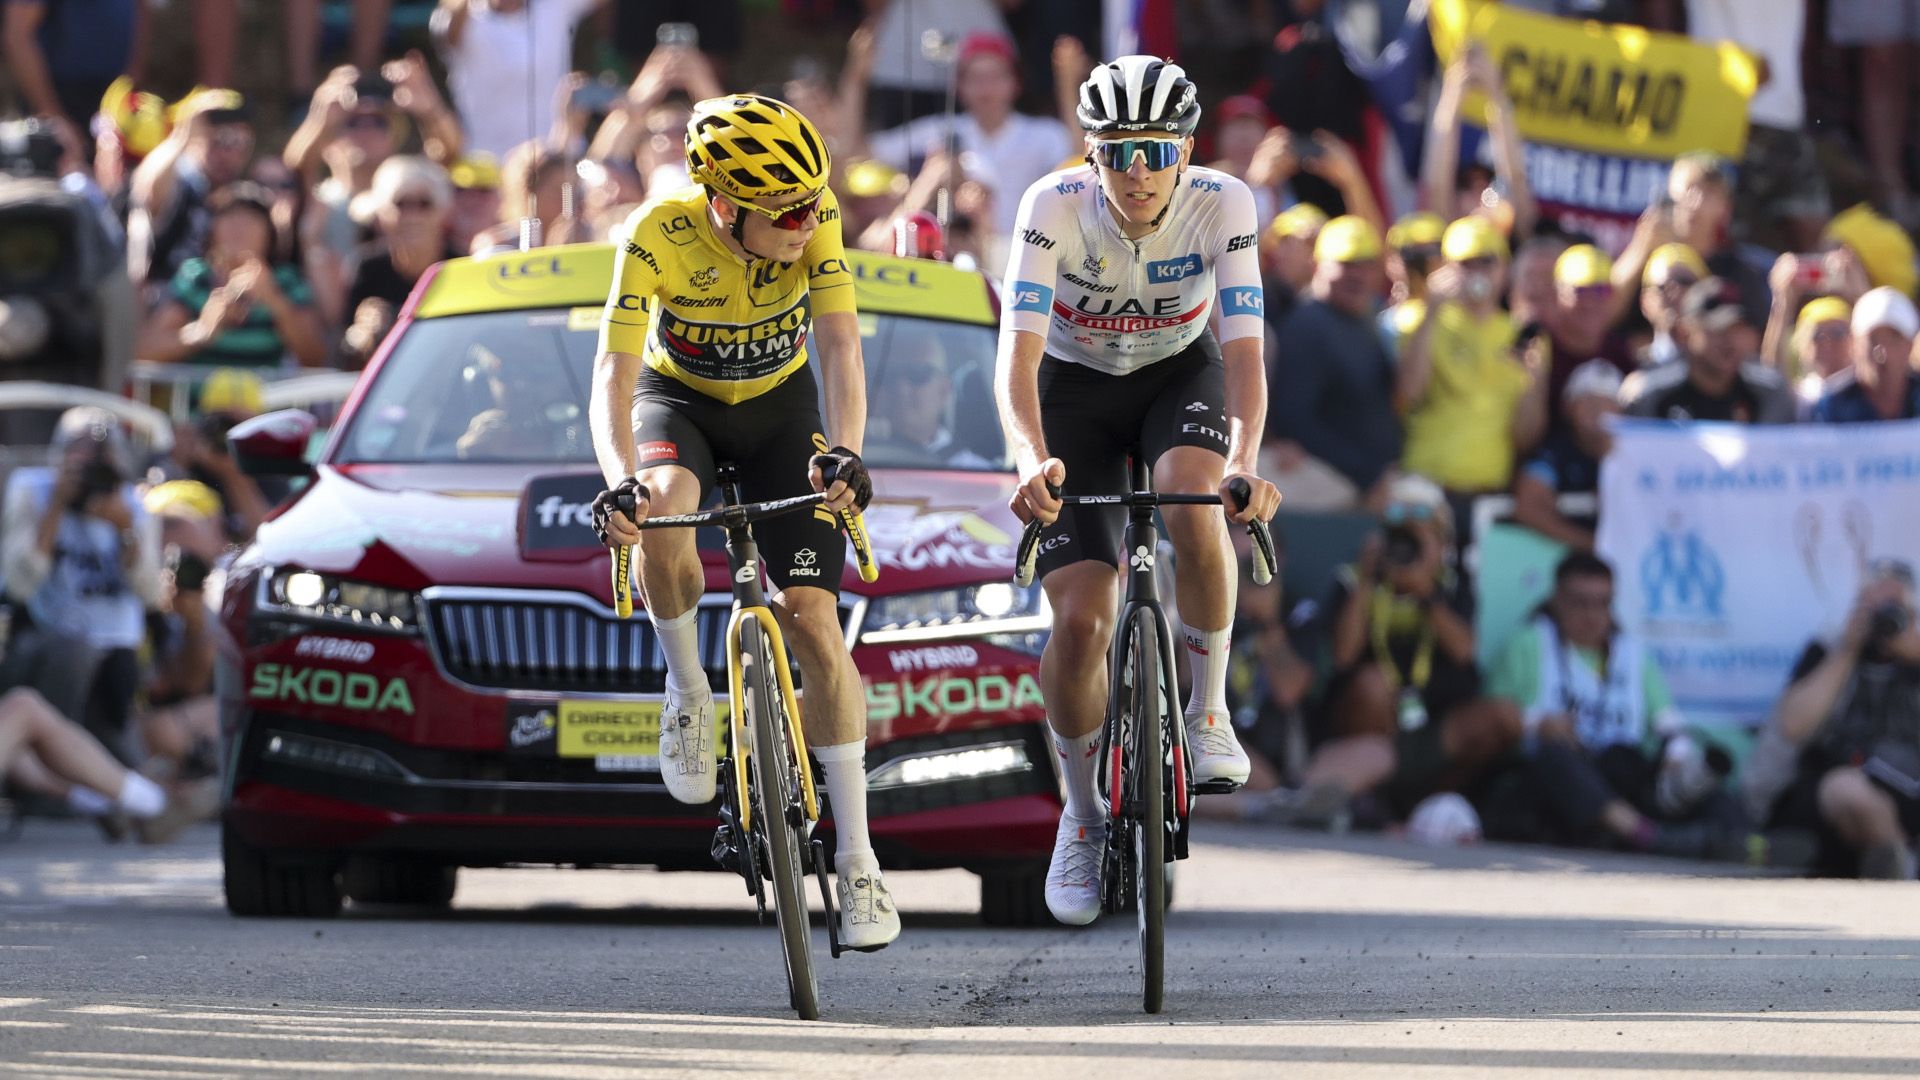 How to watch Tour de France live stream stages 16, 17 and 18 for free